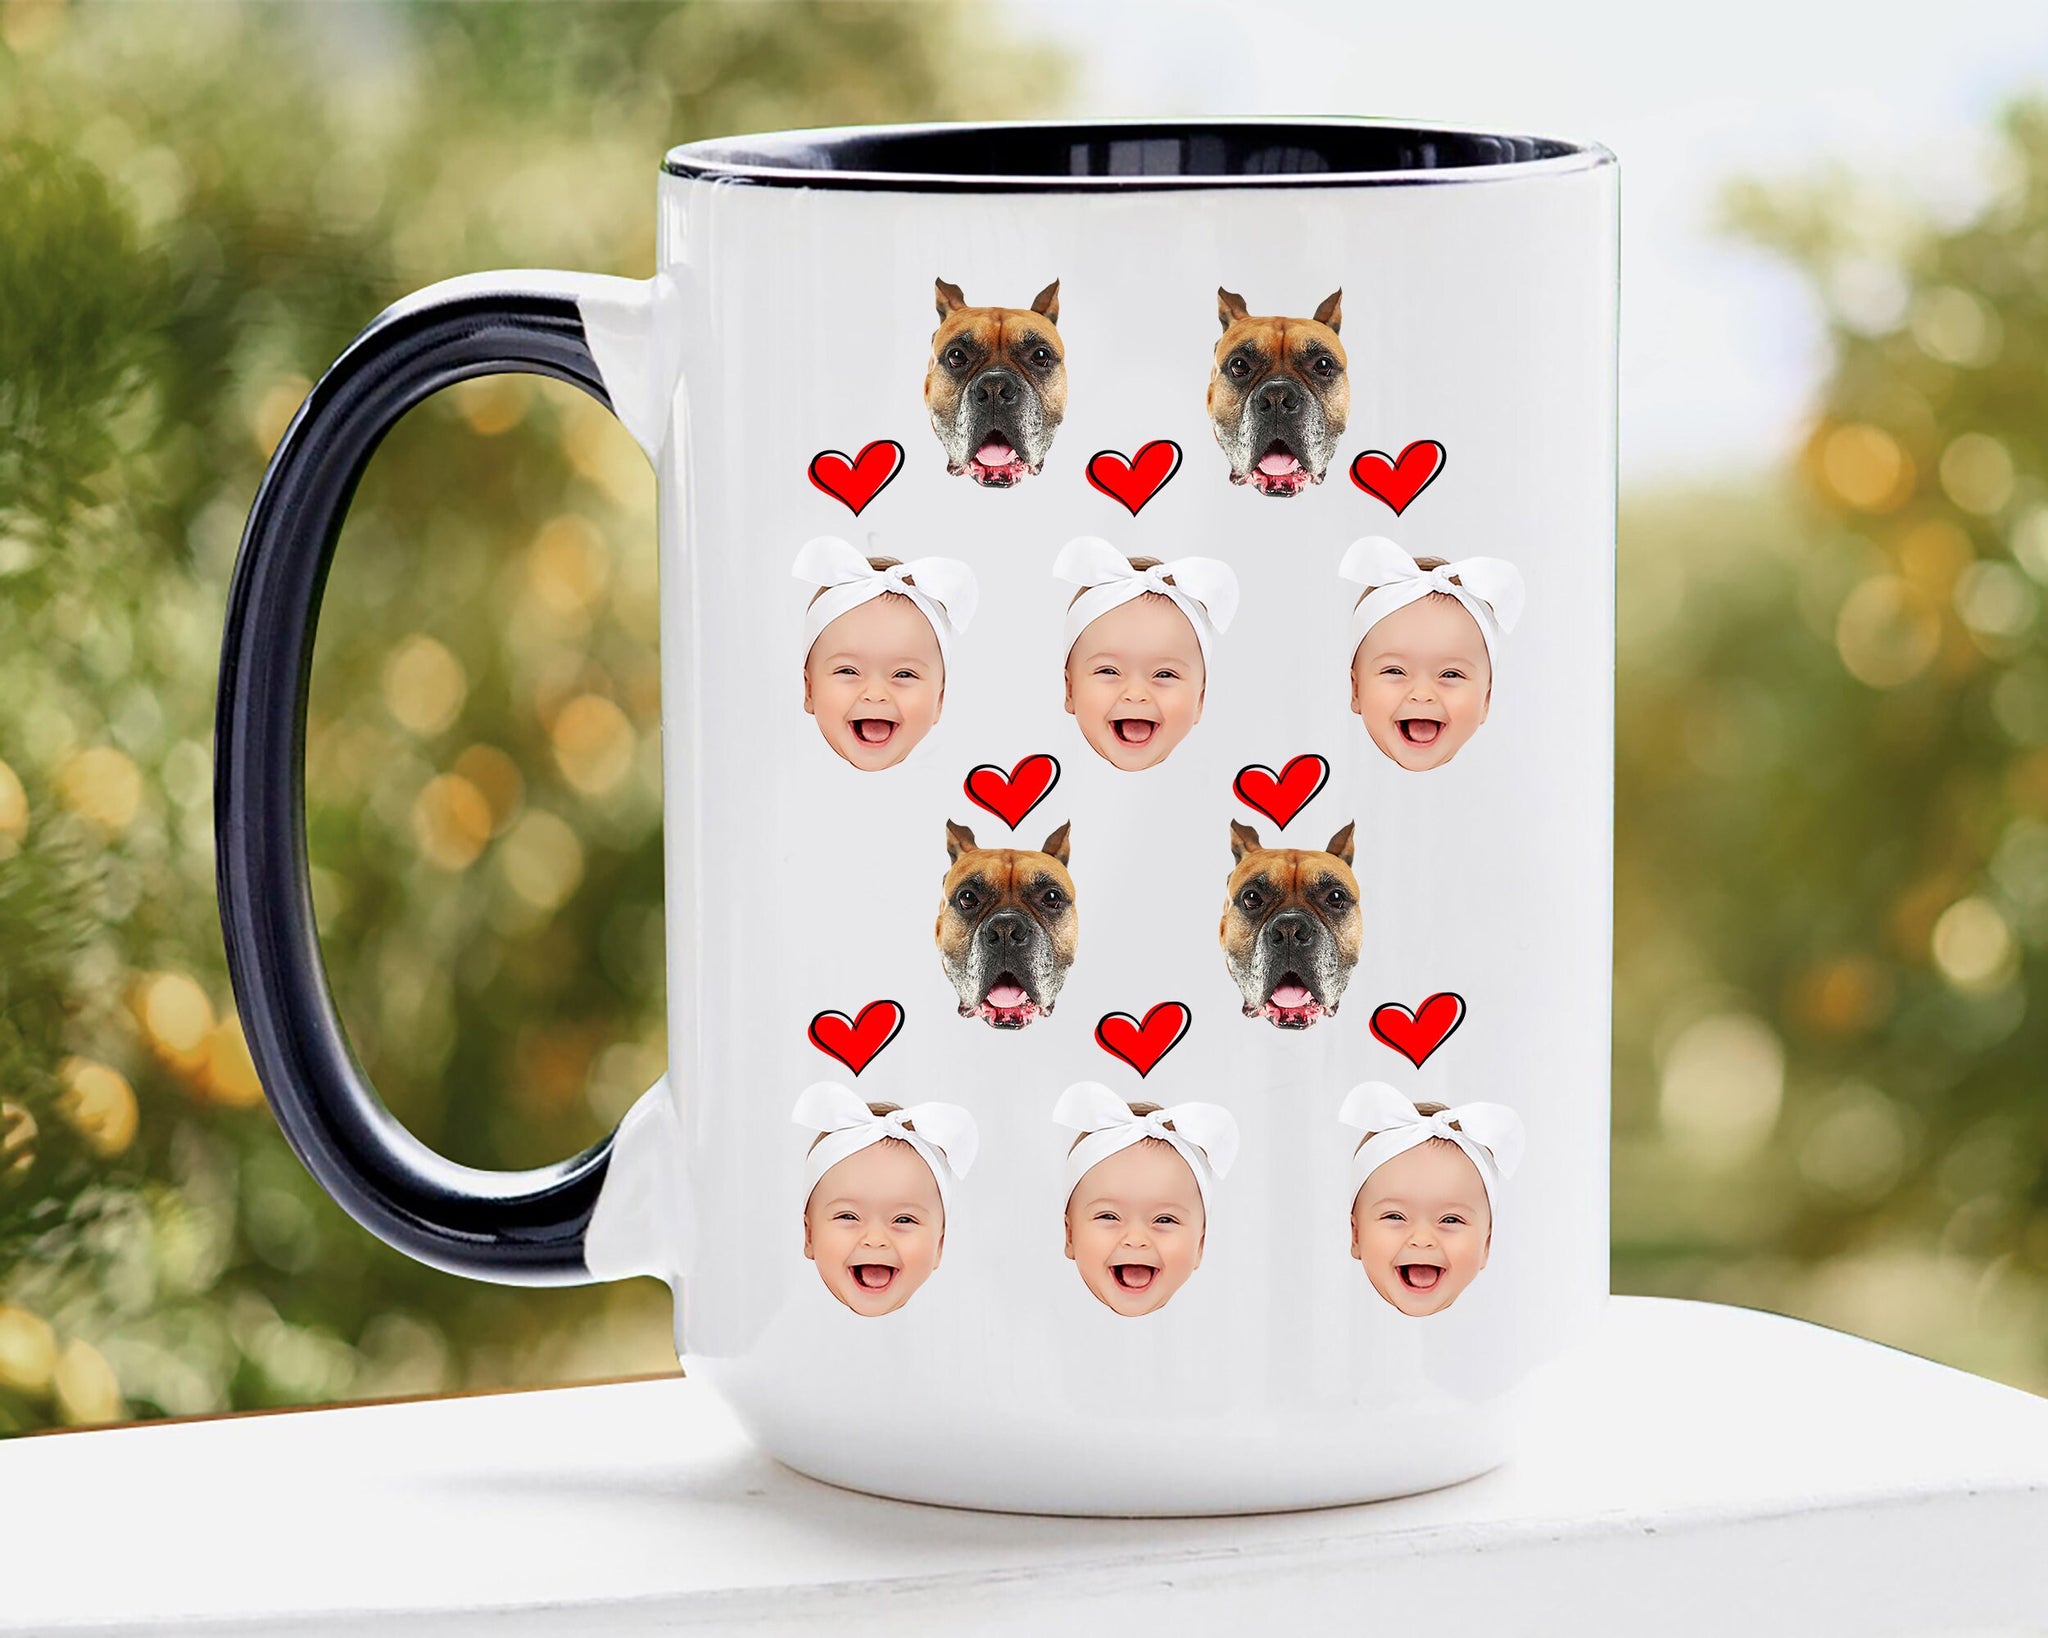 Personalized Face Mug, Baby Face Mugs, Your Pet's Face Coffee Mug, Custom Kid's Photo Coffee Cup, Gift for Mom, Dad, Funny Family Gift